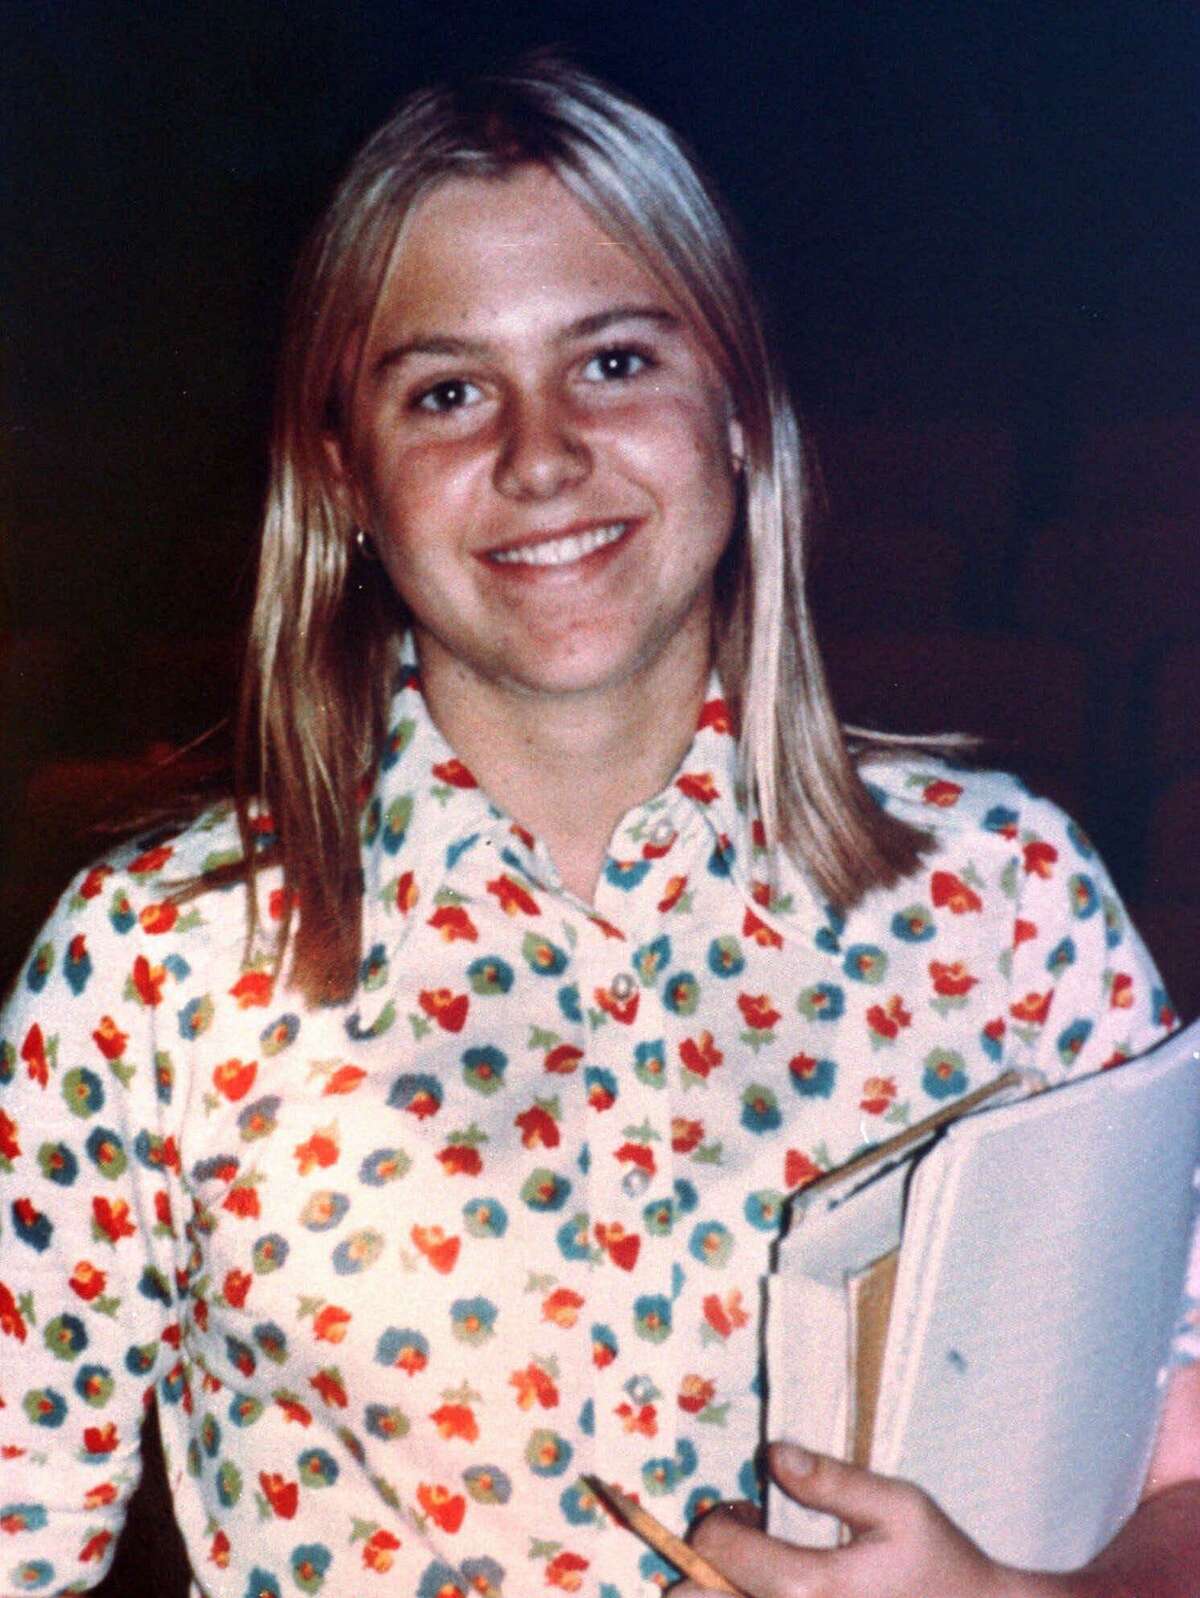 This 1974 file photograph shows Martha Moxley. The Connecticut Supreme Court has vacated Kennedy cousin Michael Skakel's murder conviction of Moxley and ordered a new trial in connection with a 1975 killing in wealthy Greenwich. The court issued a 4-3 ruling Friday, May 4, 2018, that Skakel's trial attorney, Michael Sherman, failed to present evidence of an alibi. (AP Photo)